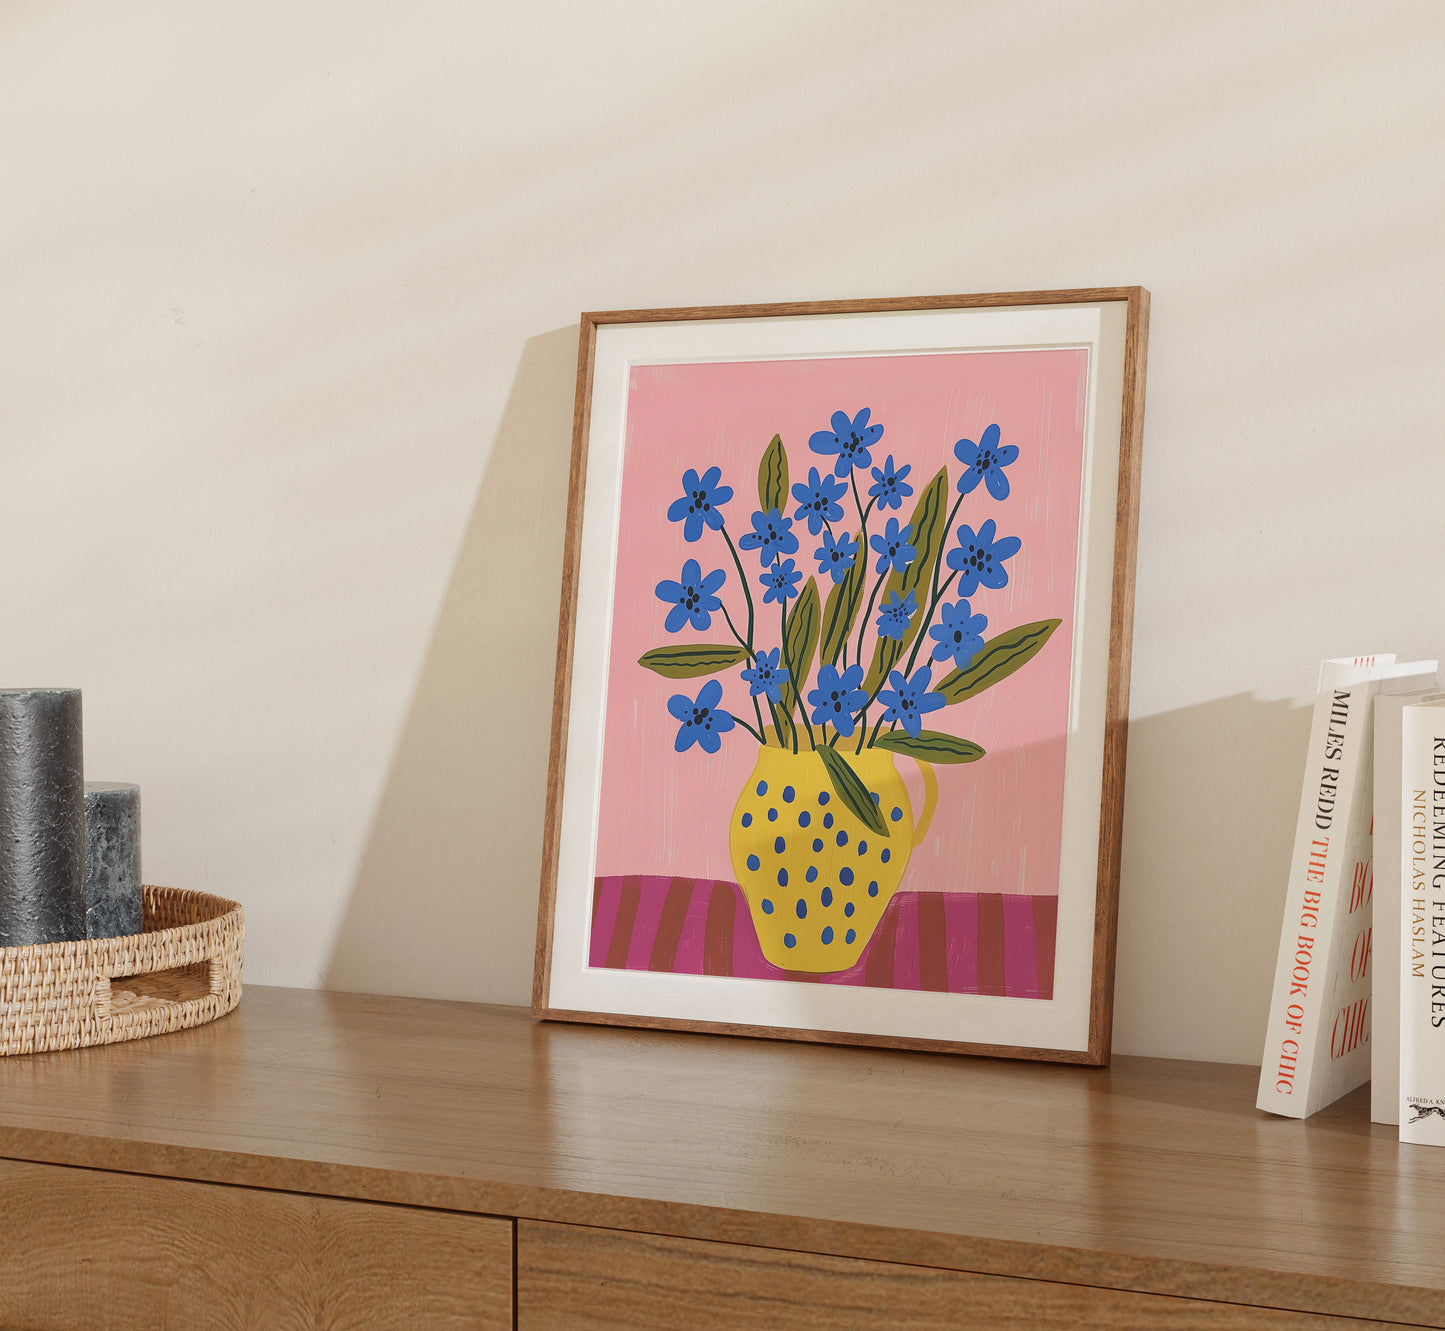 Illustration of blue flowers in a yellow vase framed and displayed on a shelf